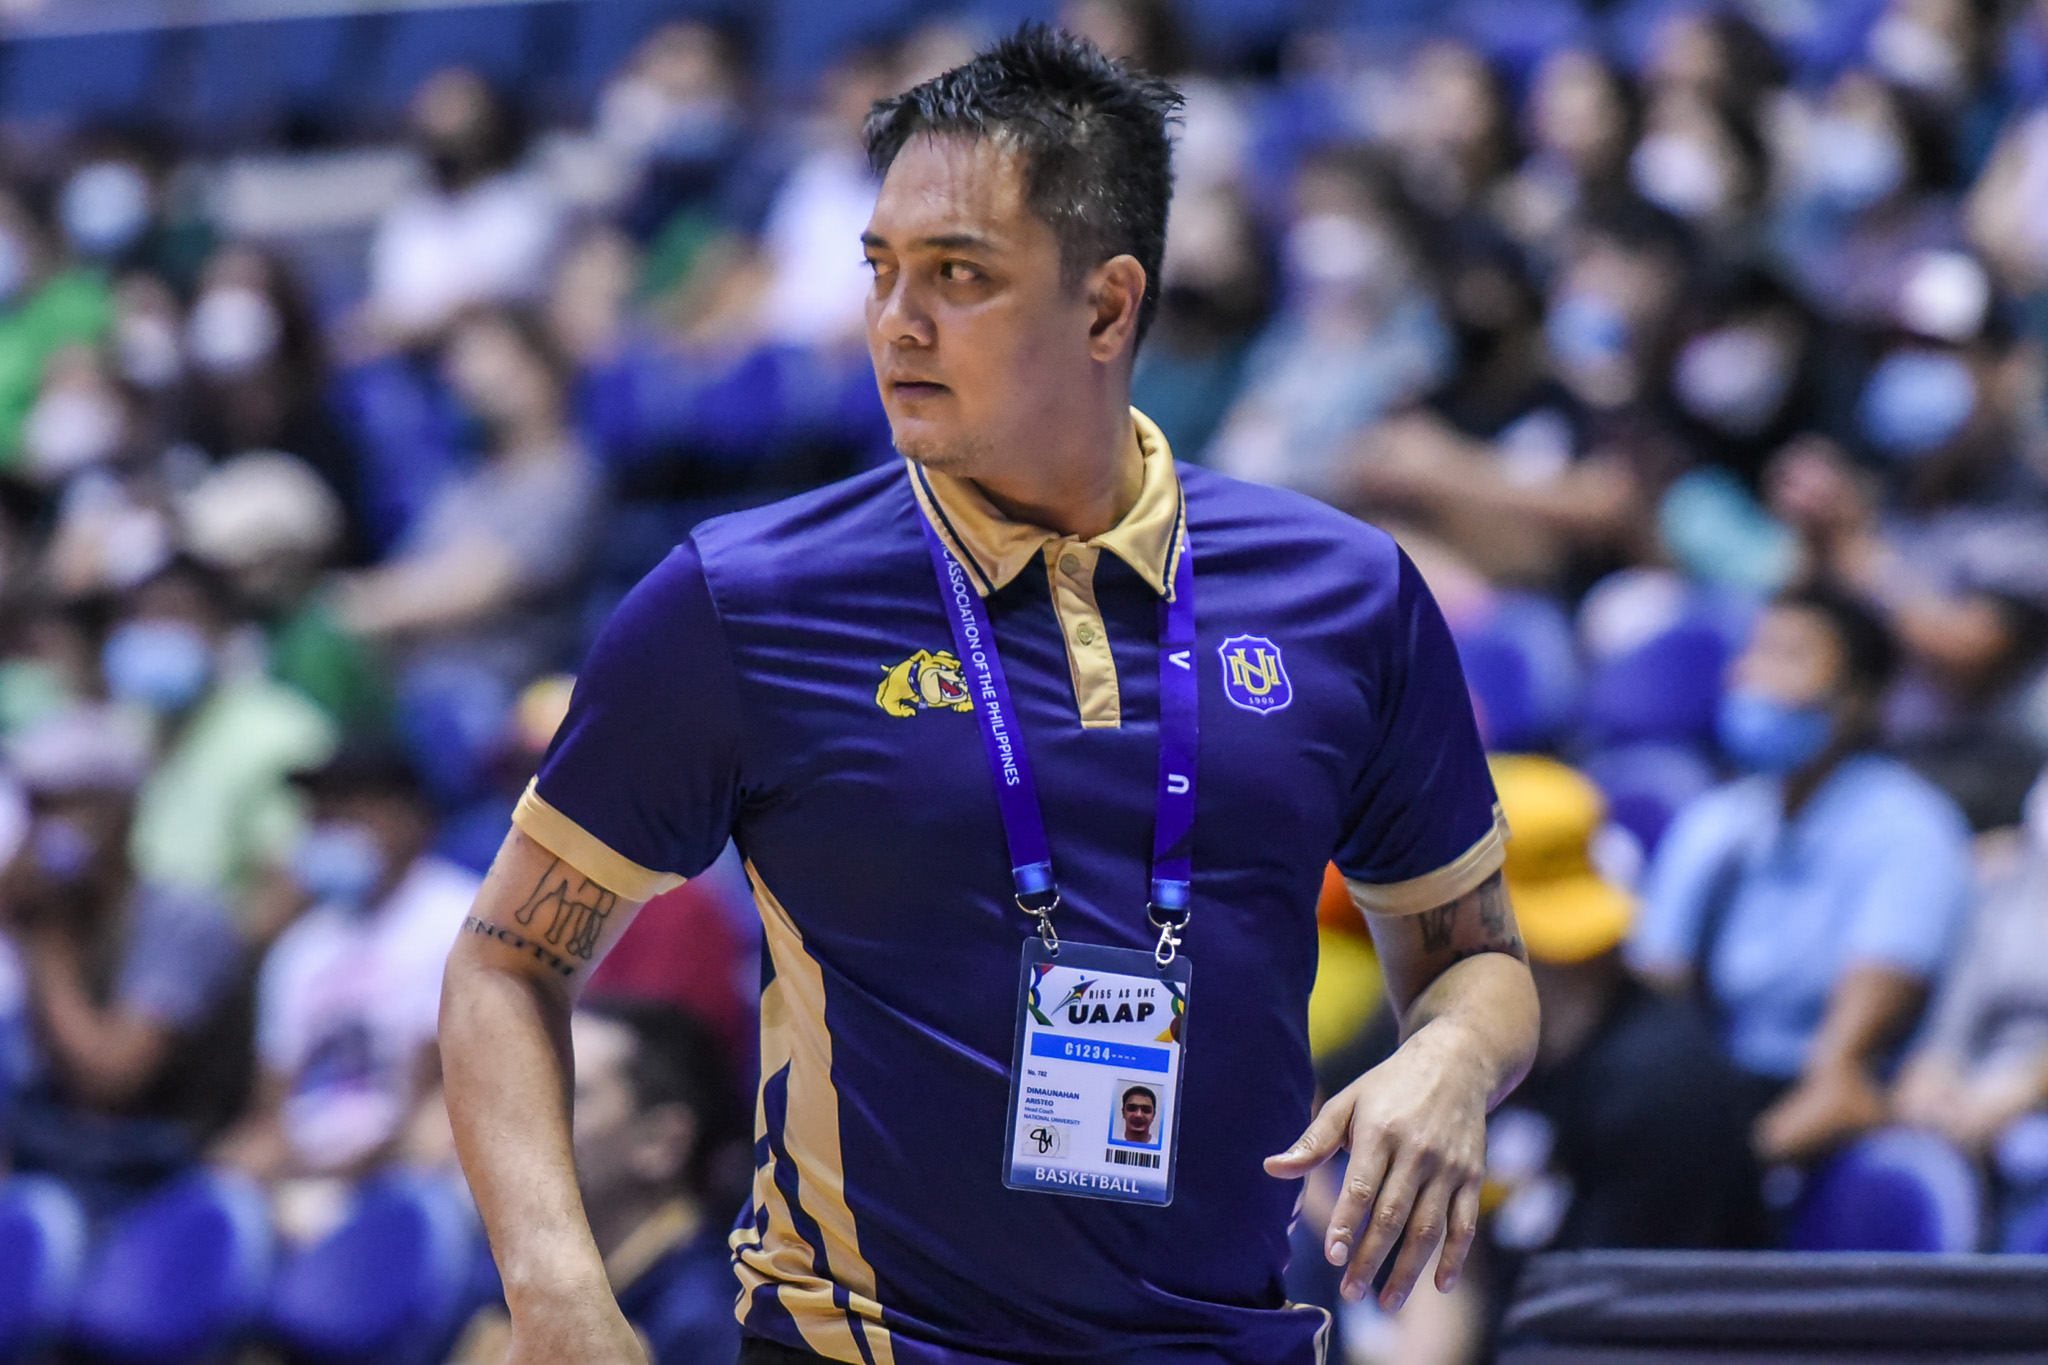 UAAP-85-WBB-NU-vs.-DLSU-G1-Aris-Dimaunahan-7978 Mikka Cacho wants to end five-year run in NU with a bang Basketball News NU UAAP  - philippine sports news